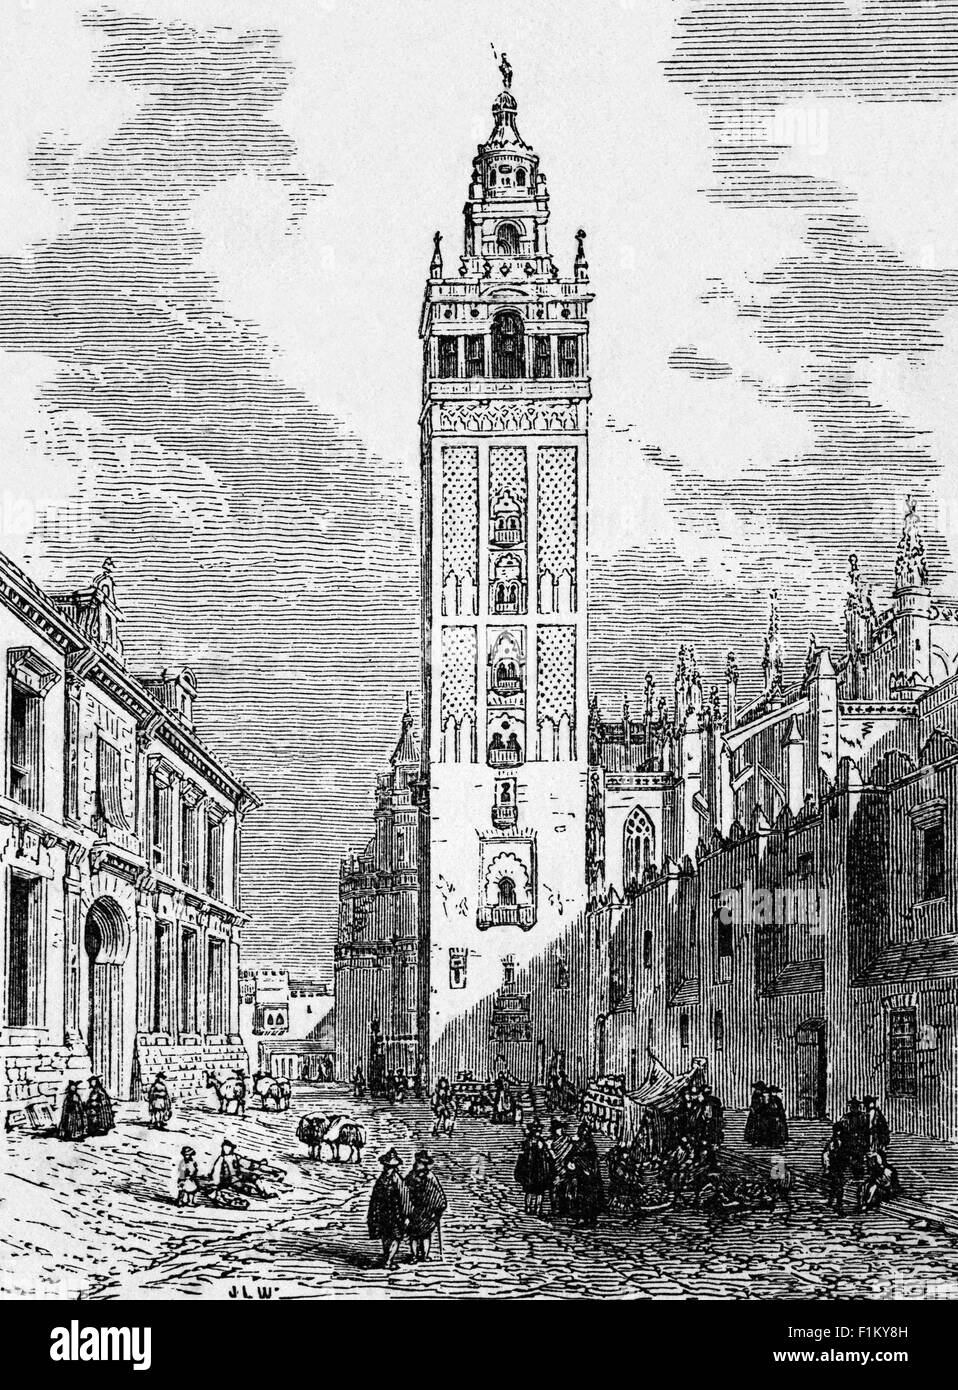 19th Century view of the Giralda, the bell tower of Seville Cathedral in Seville, Spain. It was built as the minaret for the Great Mosque of Seville in al-Andalus, Moorish Spain, during the reign of the Almohad dynasty, with a Renaissance-style top added by the Catholics after the expulsion of the Muslims from the area. Dating from the Reconquest of 1248 to the 16th century and built by the Moors. Stock Photo